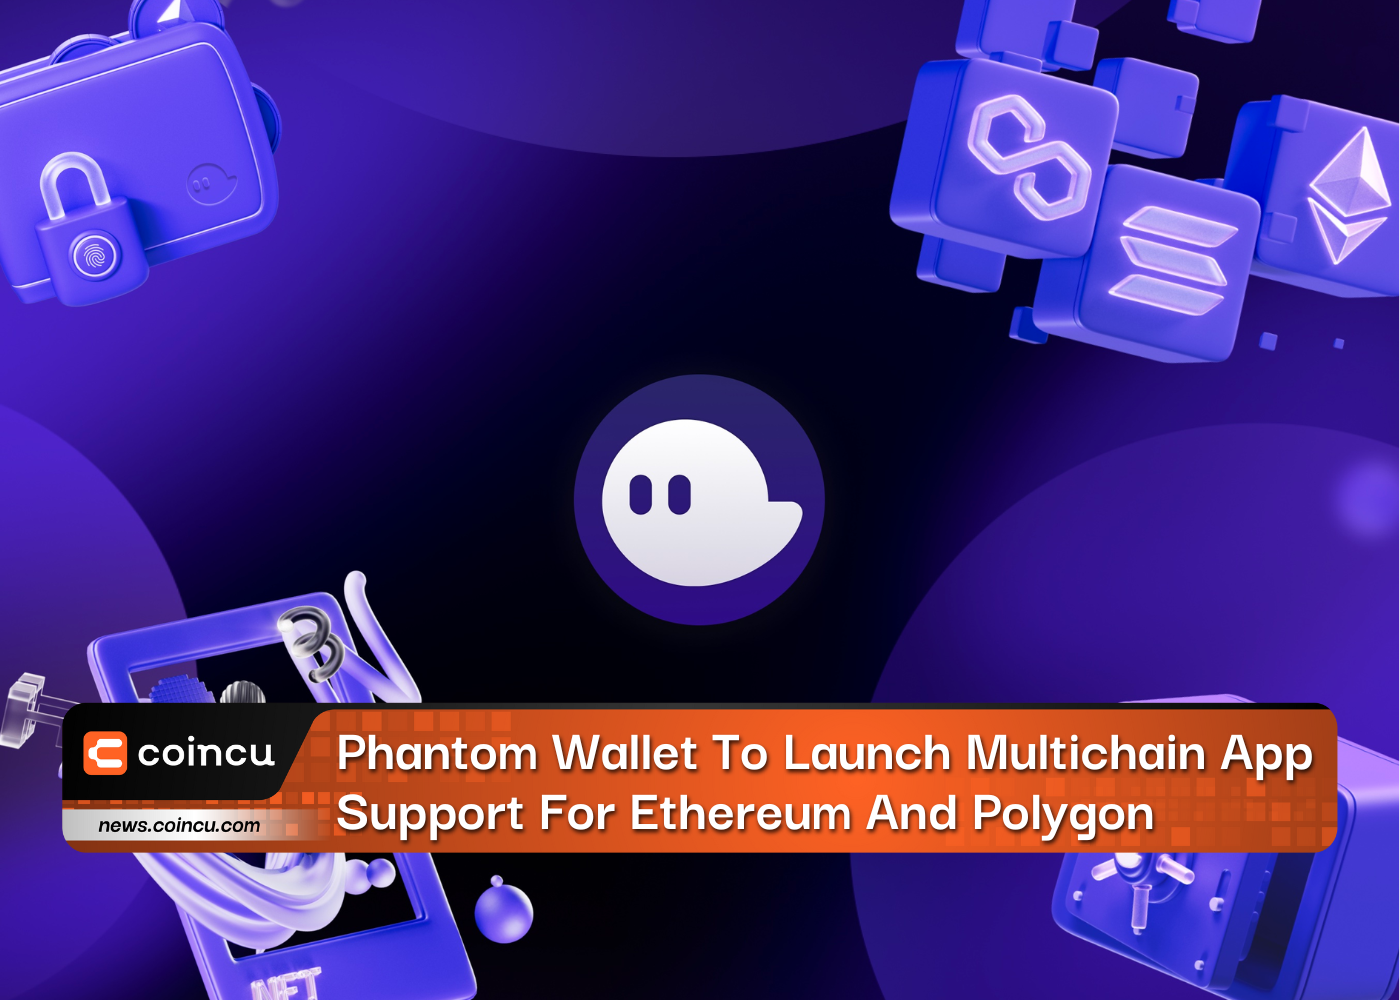 Phantom Wallet To Launch Multichain App Support For Ethereum And Polygon